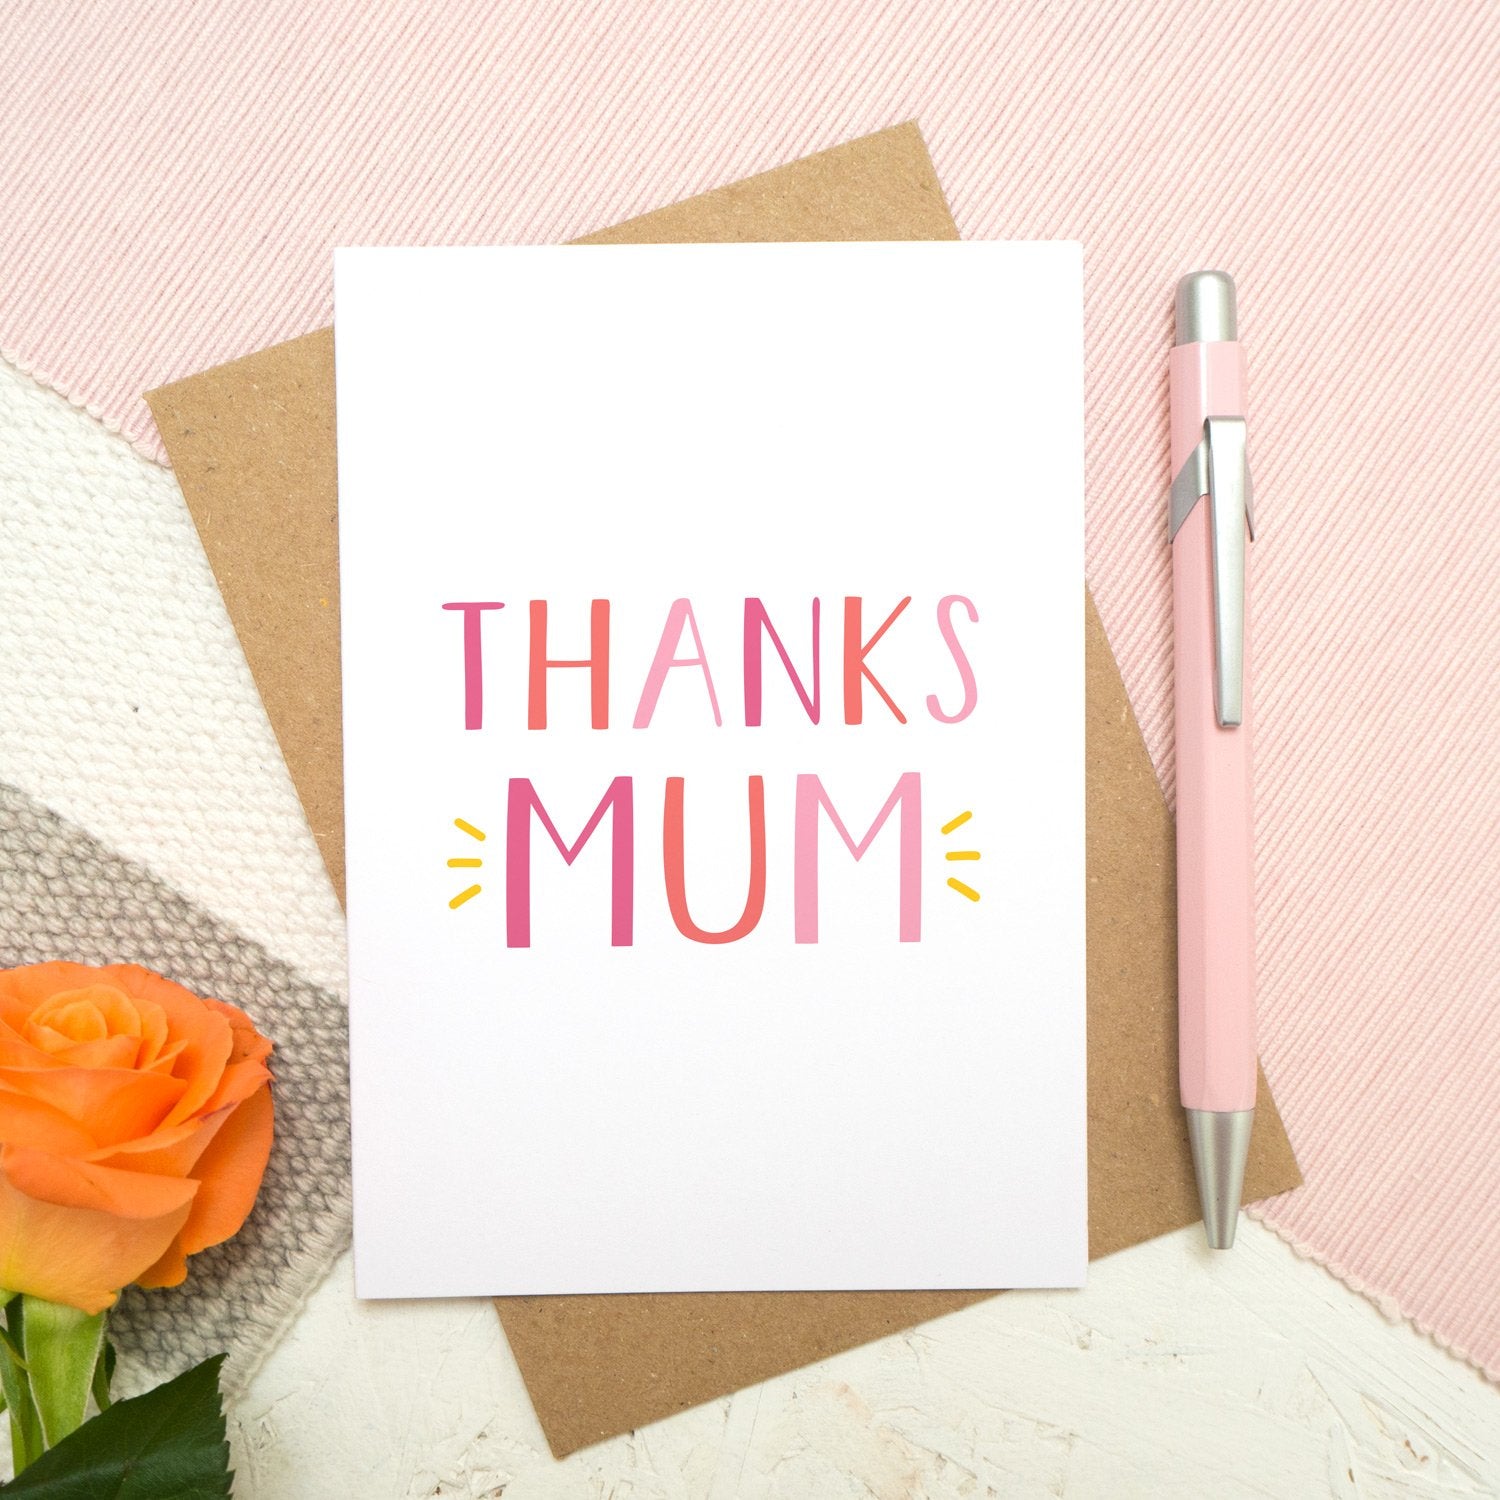 Thanks Mum - a simple typographic card in varying tones of pink with a pop of yellow. Each card comes with a kraft brown envelope. Designed and made by Joanne Hawker.